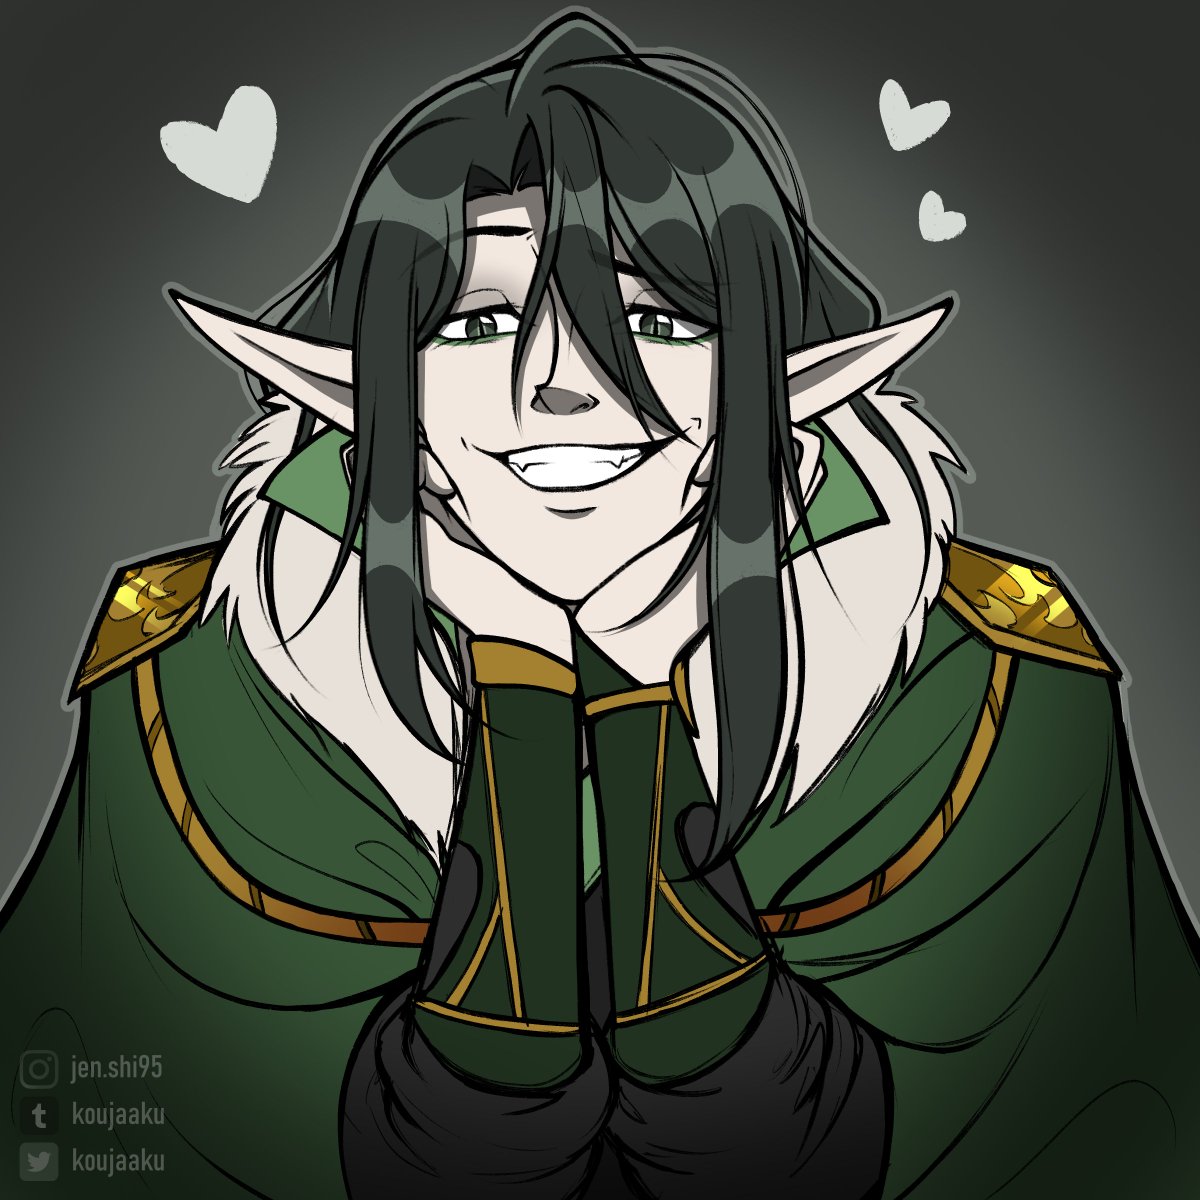 「QI RONG NATION, HOW DO WE FEEL ABOUT THE」|Koujaaku 💚のイラスト